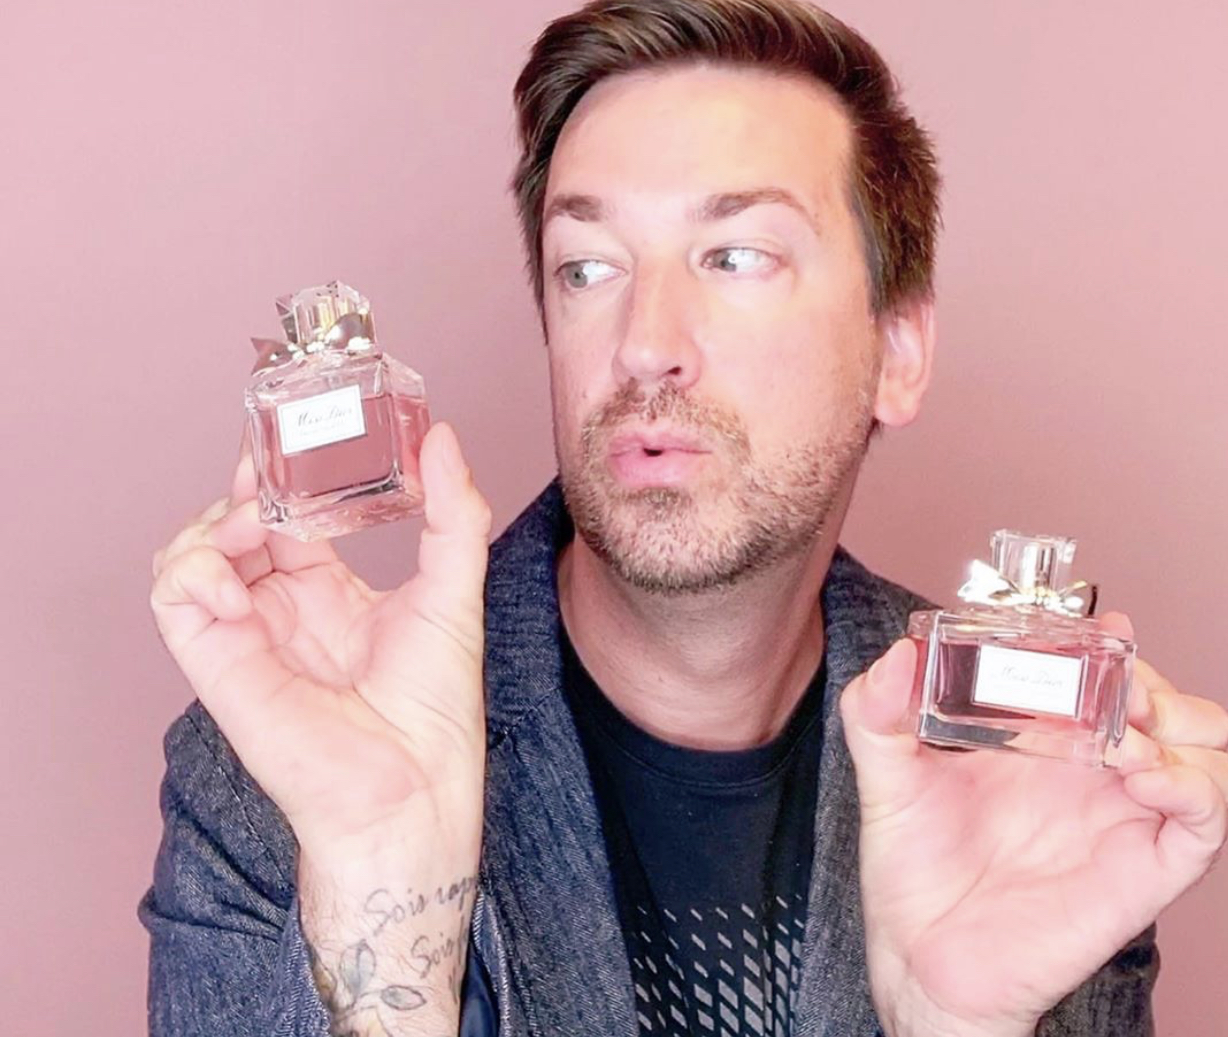 miss dior blooming bouquet vs absolutely blooming